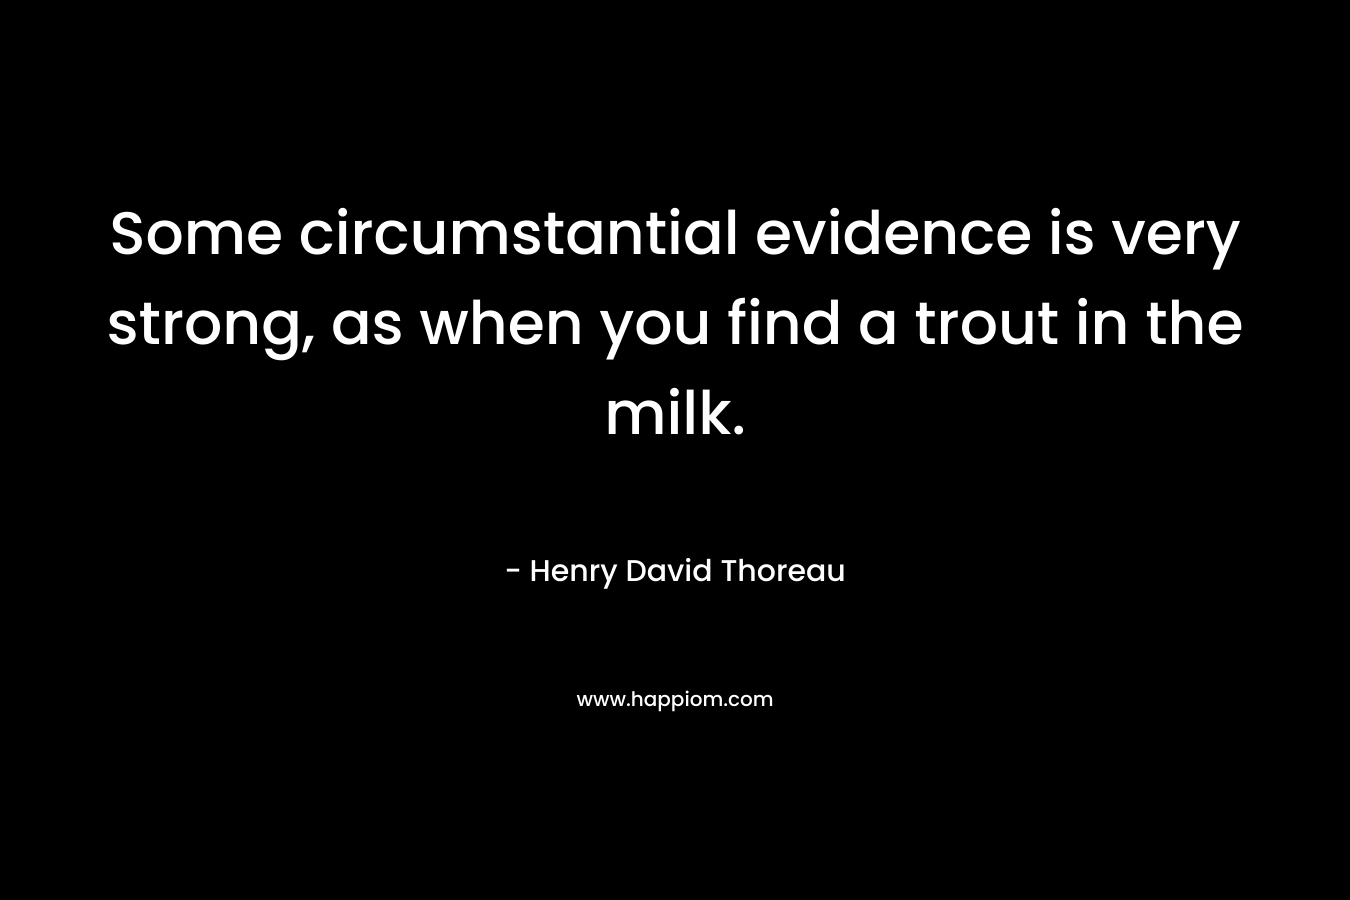 Some circumstantial evidence is very strong, as when you find a trout in the milk.